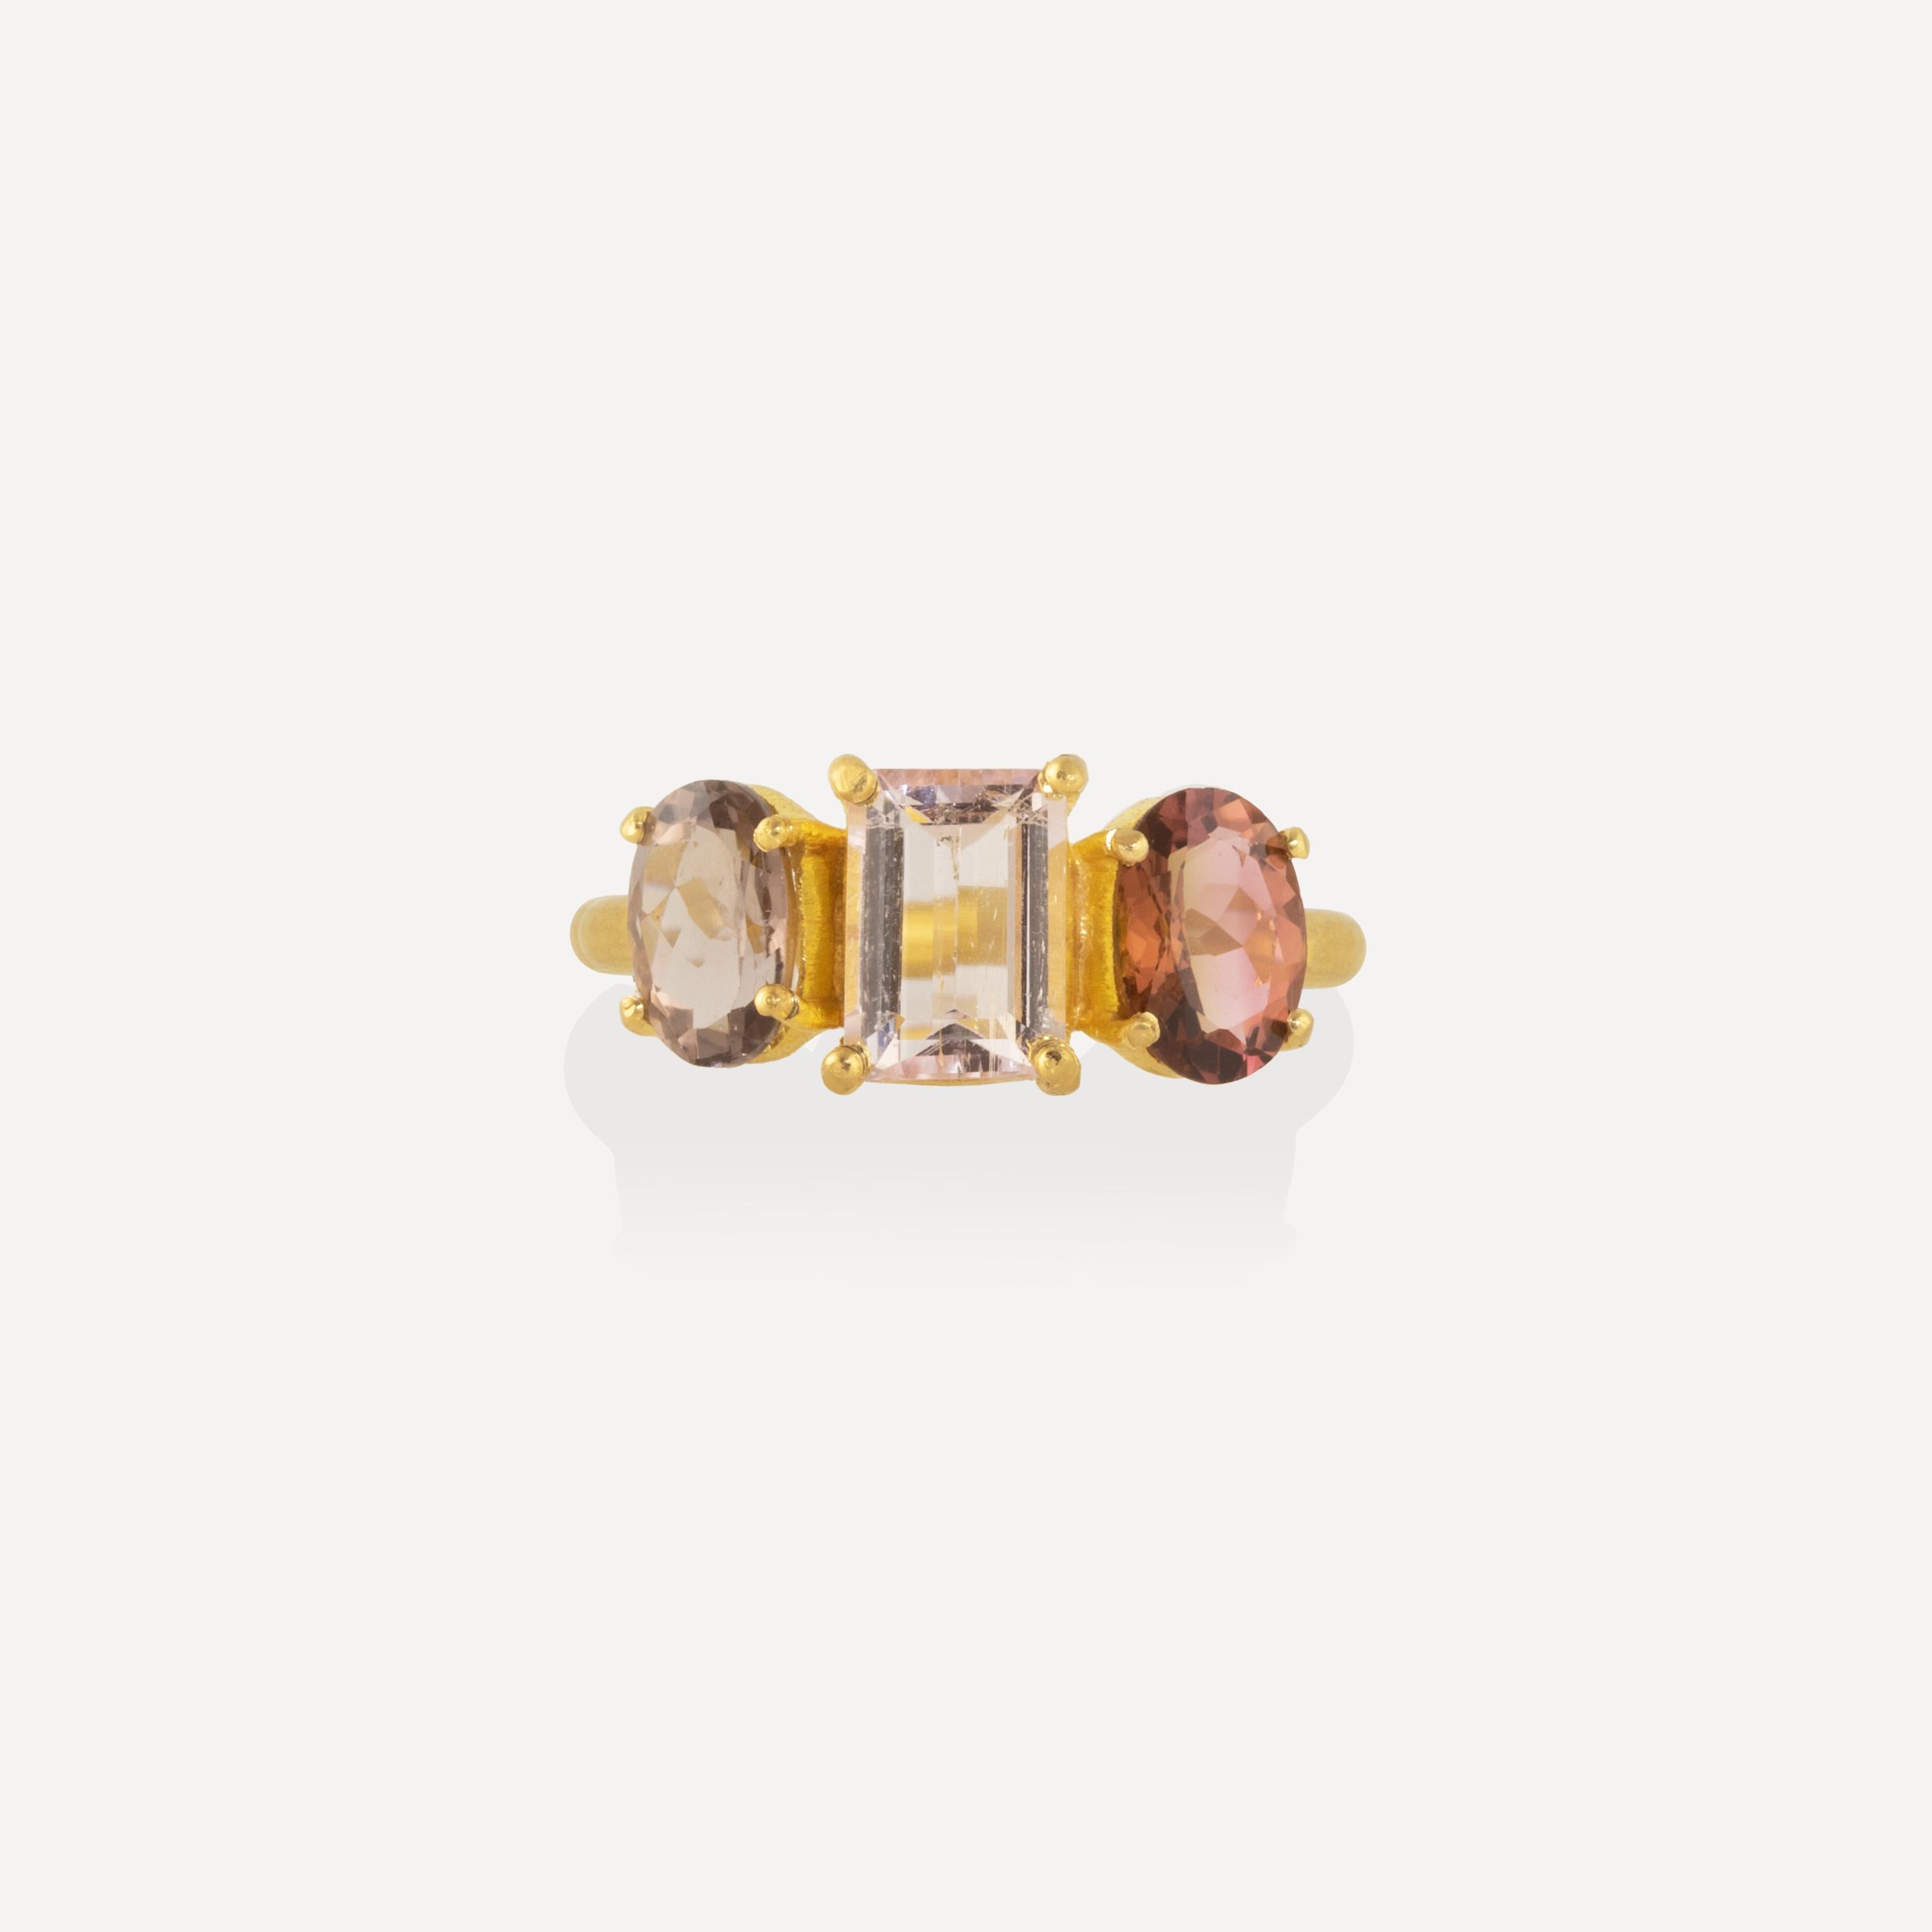 A timeless ring featuring a 3.75 carats of multi-colored tourmalines. In the center is an emerald cut light pink gem, with deeper, complimentary colored ovals on the sides. The gems are prong set 22k gold and was made in our workshop in Jaipur,